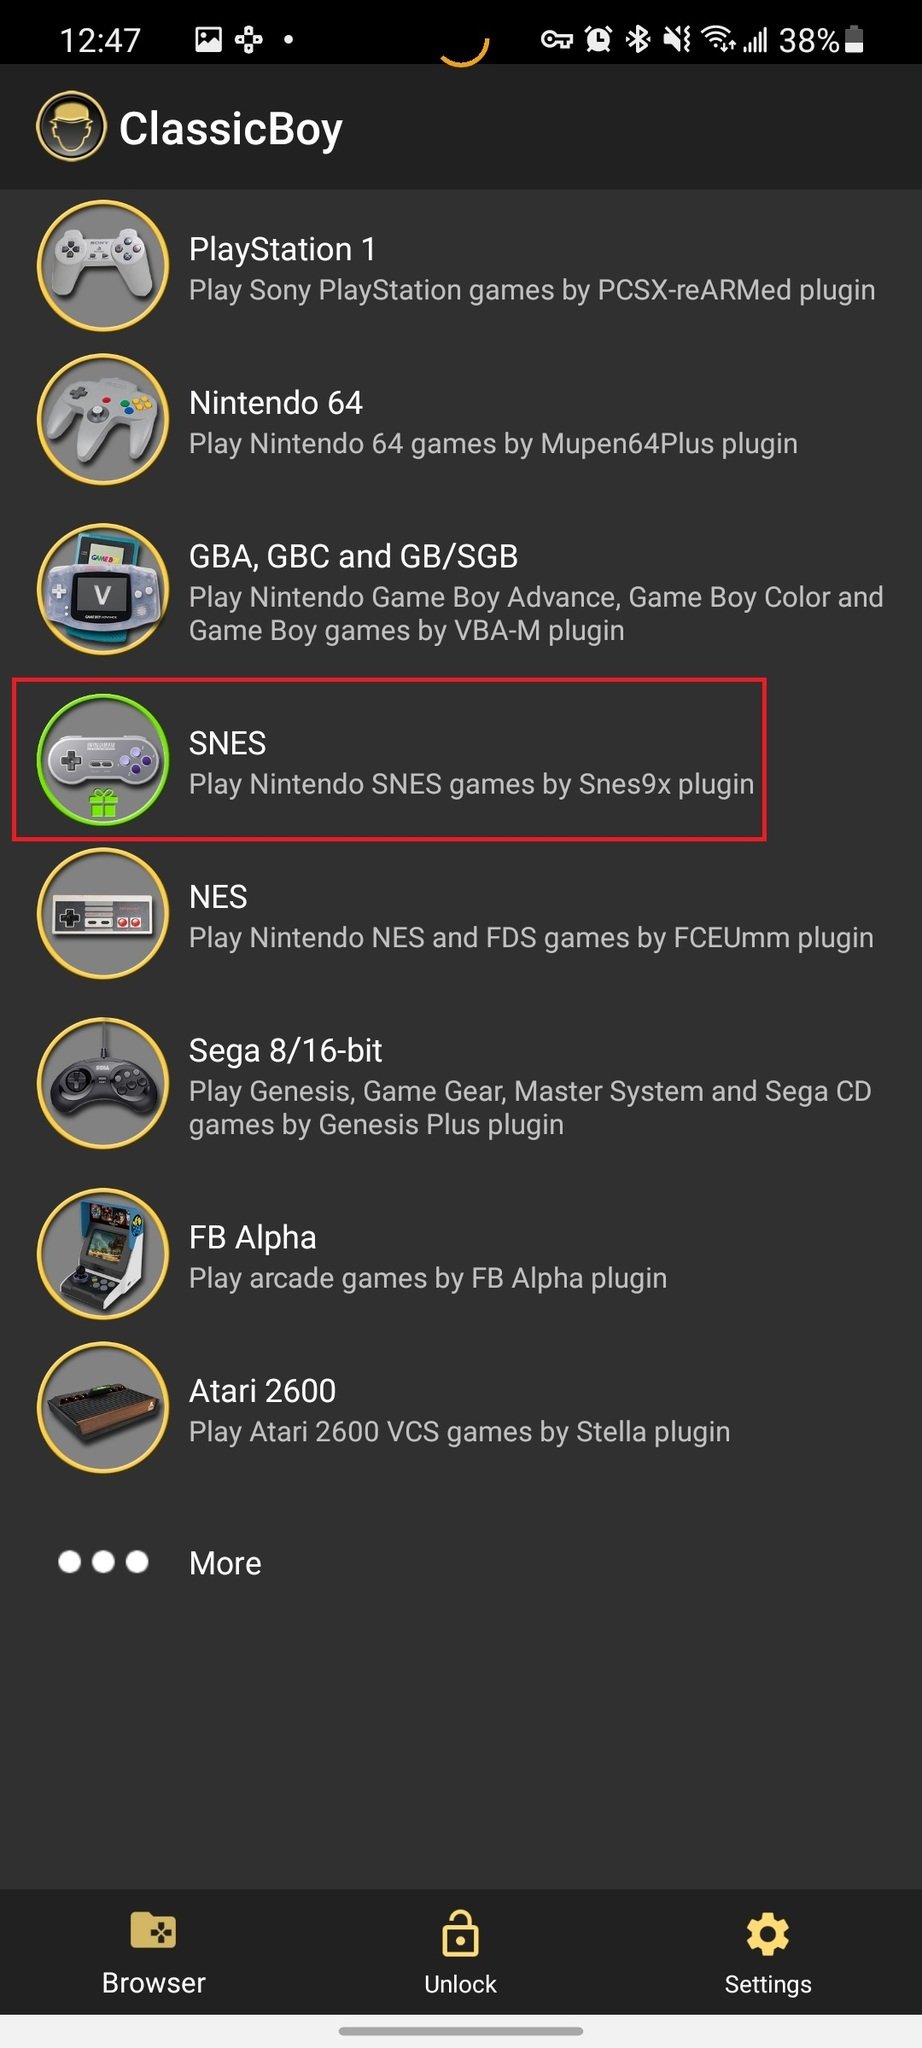 Select Snes from the Classicboy list